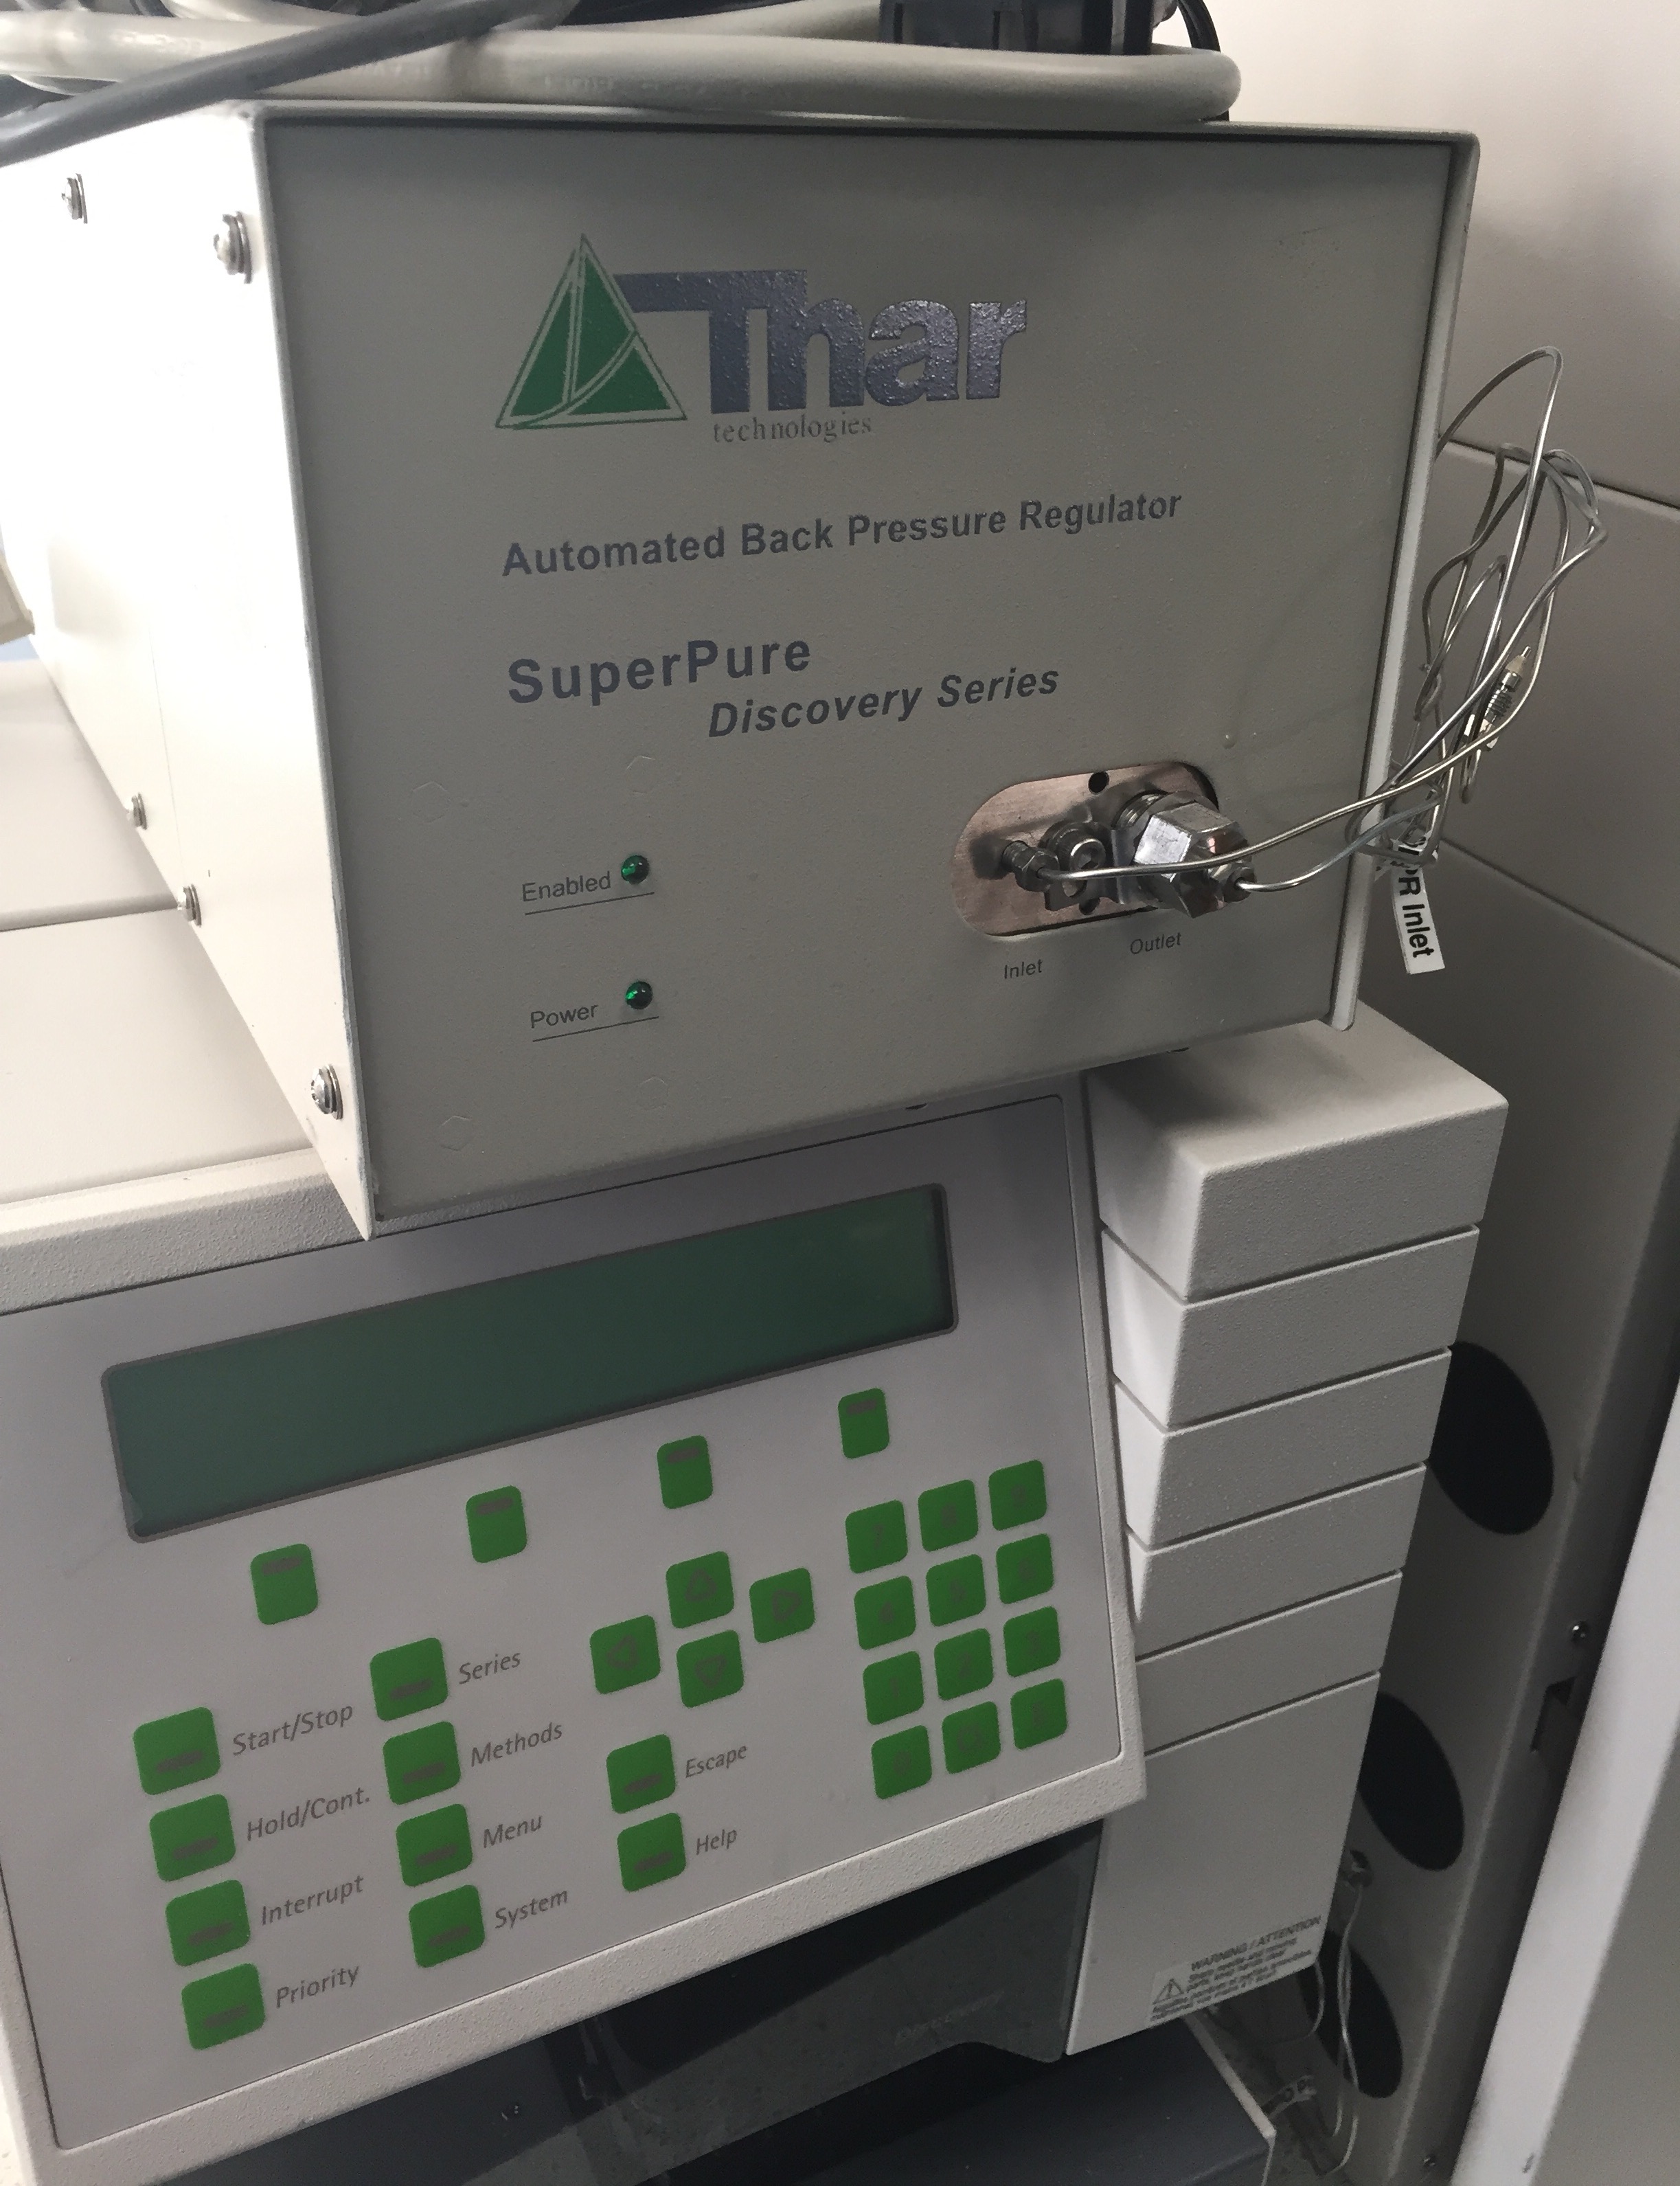 Thar SuperPure Discovery Series SFC HPLC systems